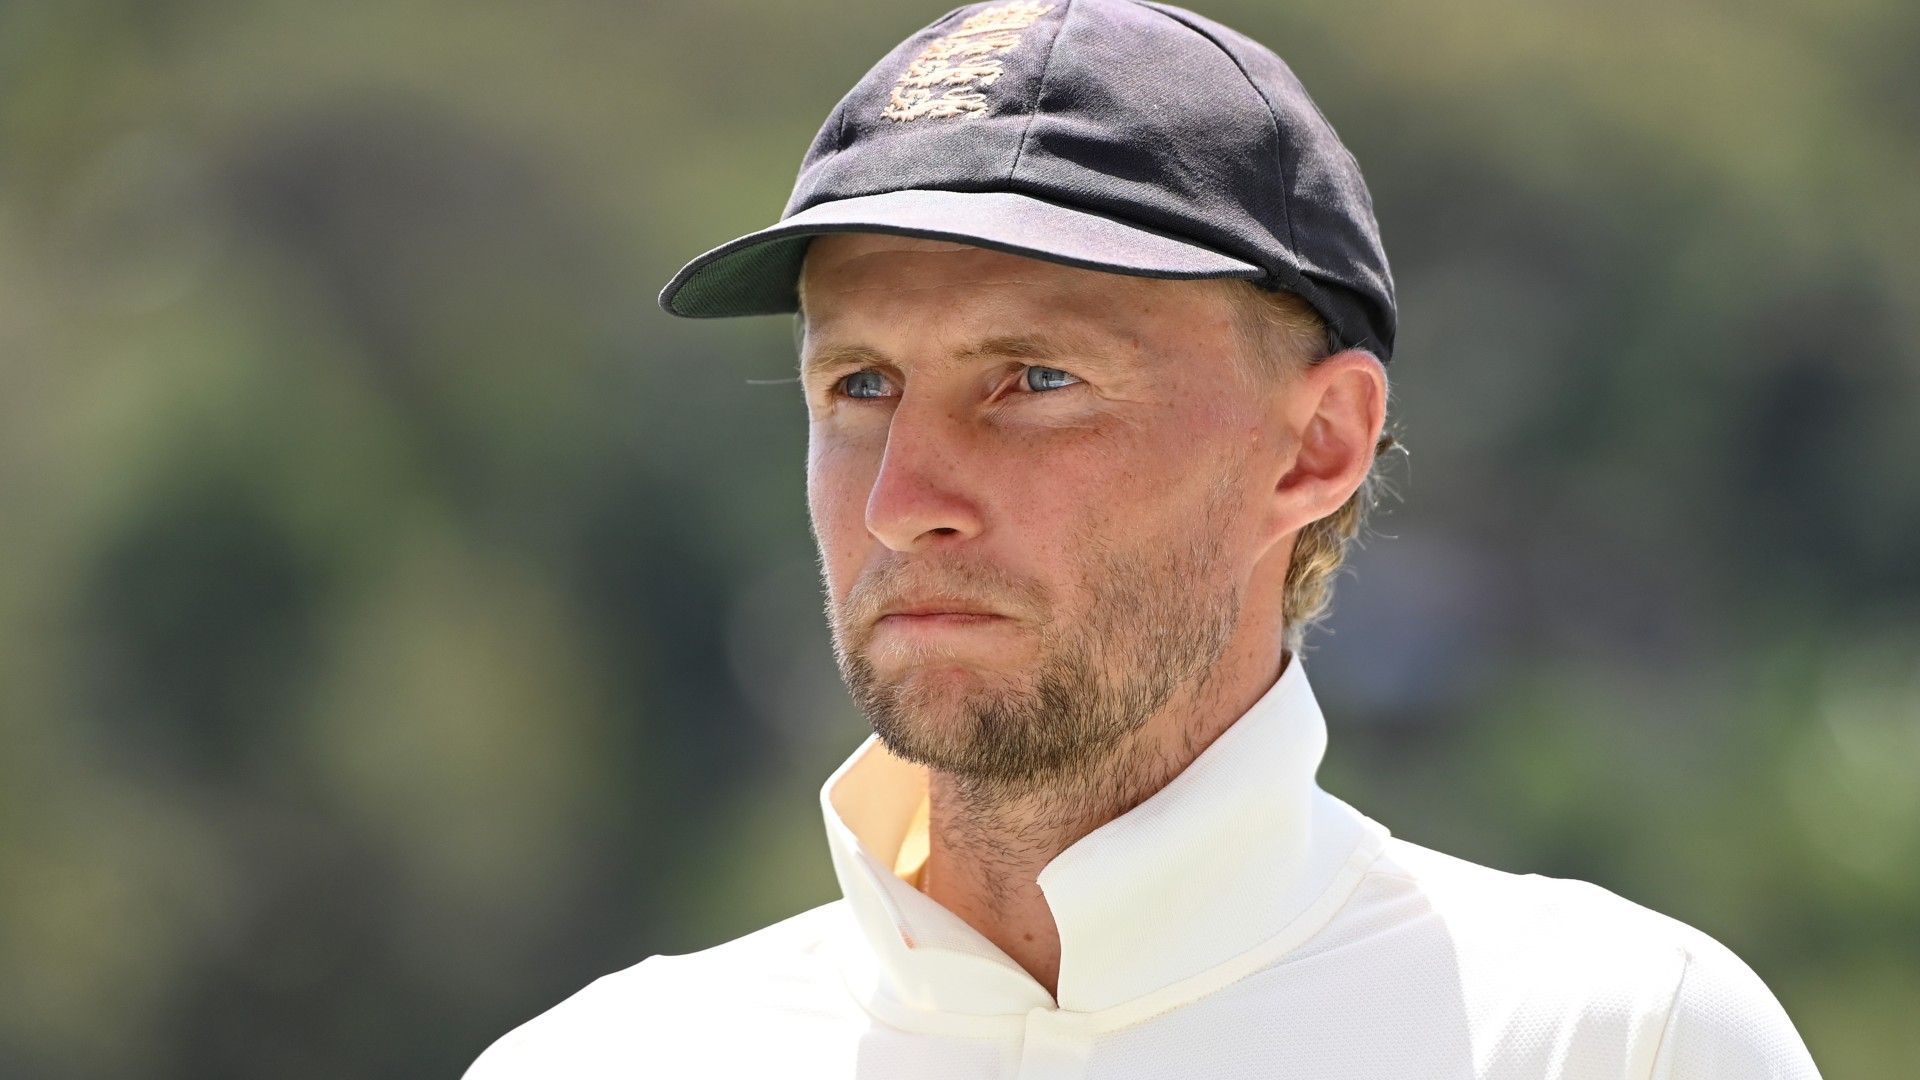 Joe Root resigns as England's Test captain after tumultuous tours to Australia and West Indies